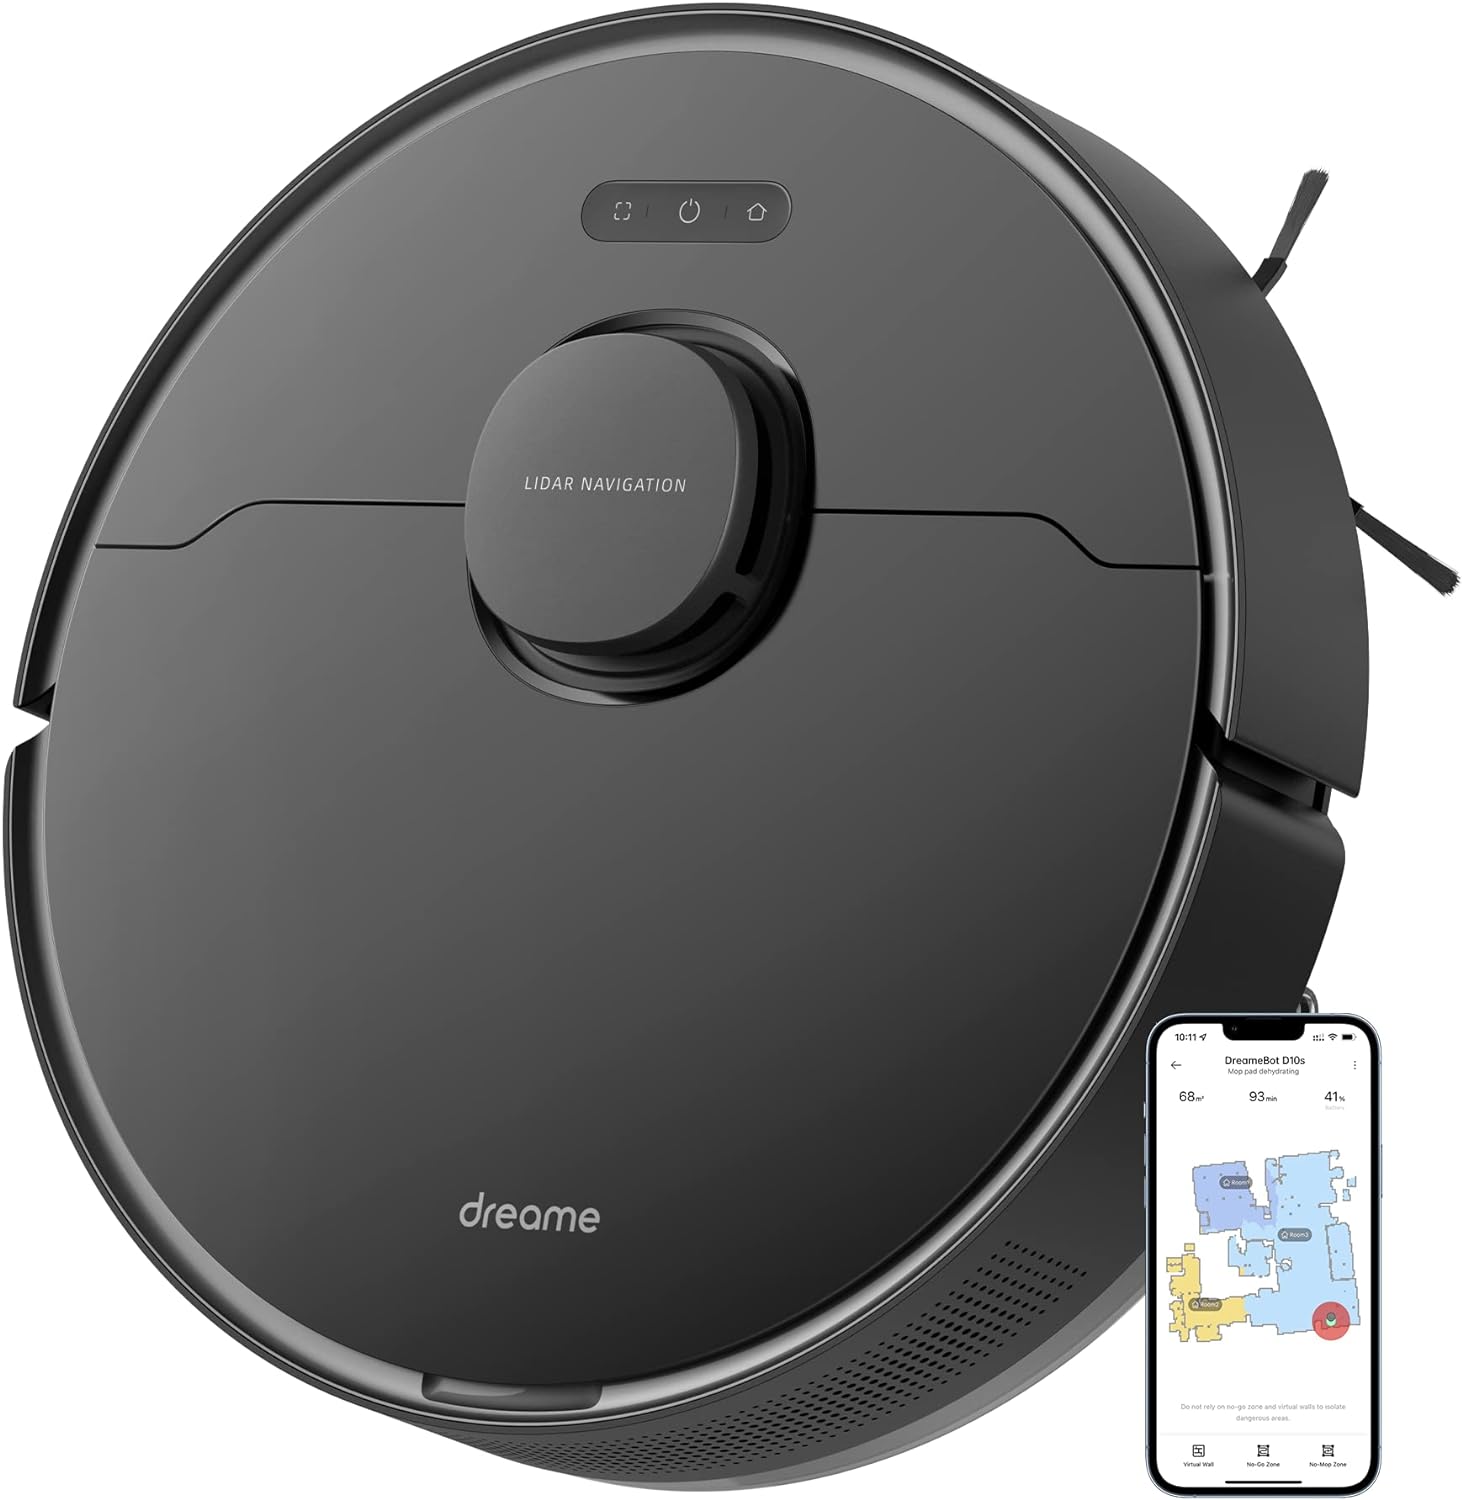 Dreametech D10s Pro Review: A Powerful Robot Vacuum with Mixed Reviews